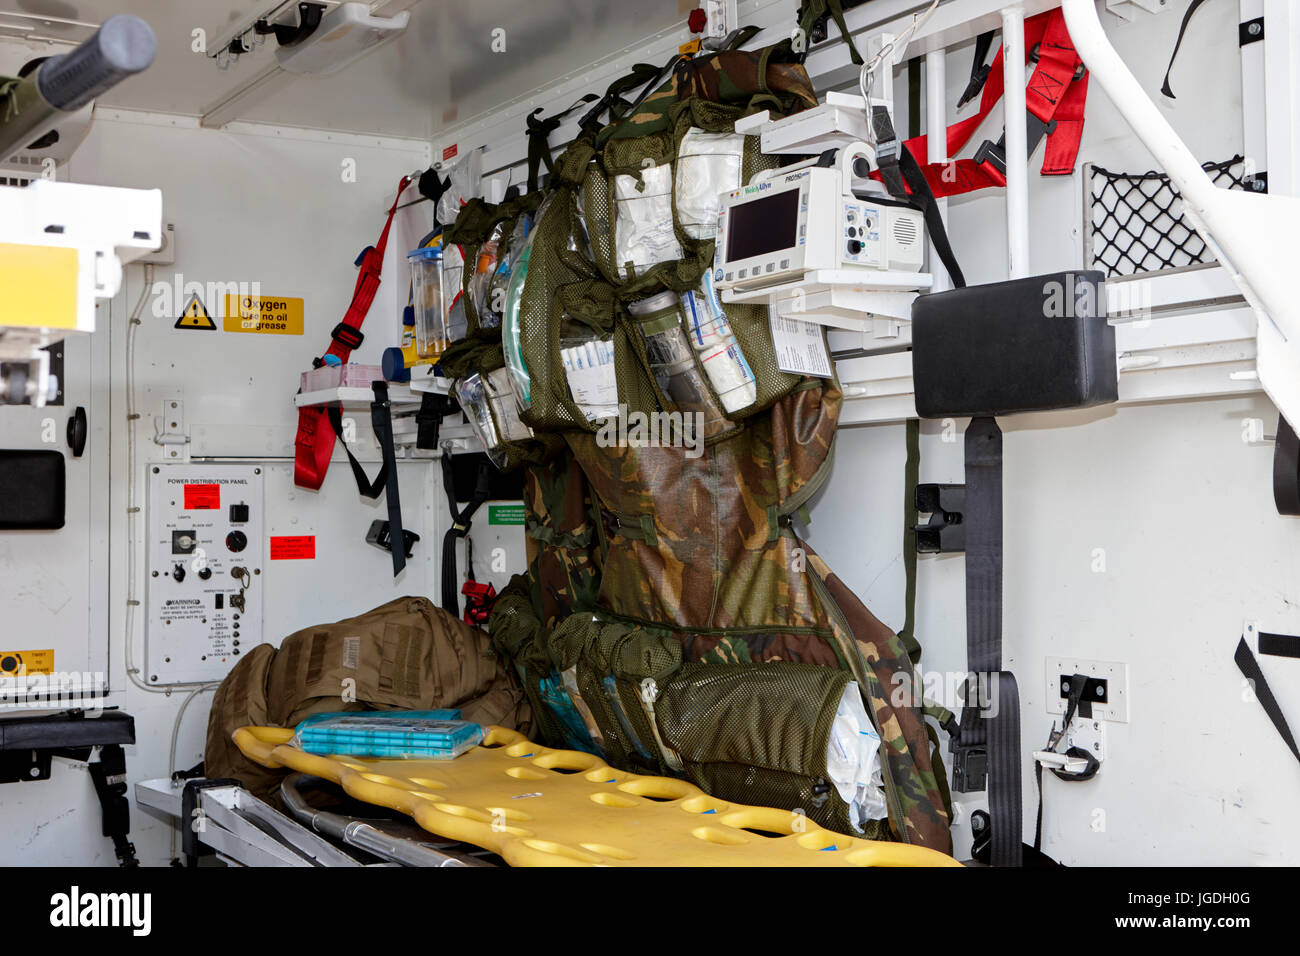 emergency equipment in the back of a british army emergency landrover ambulance uk Stock Photo